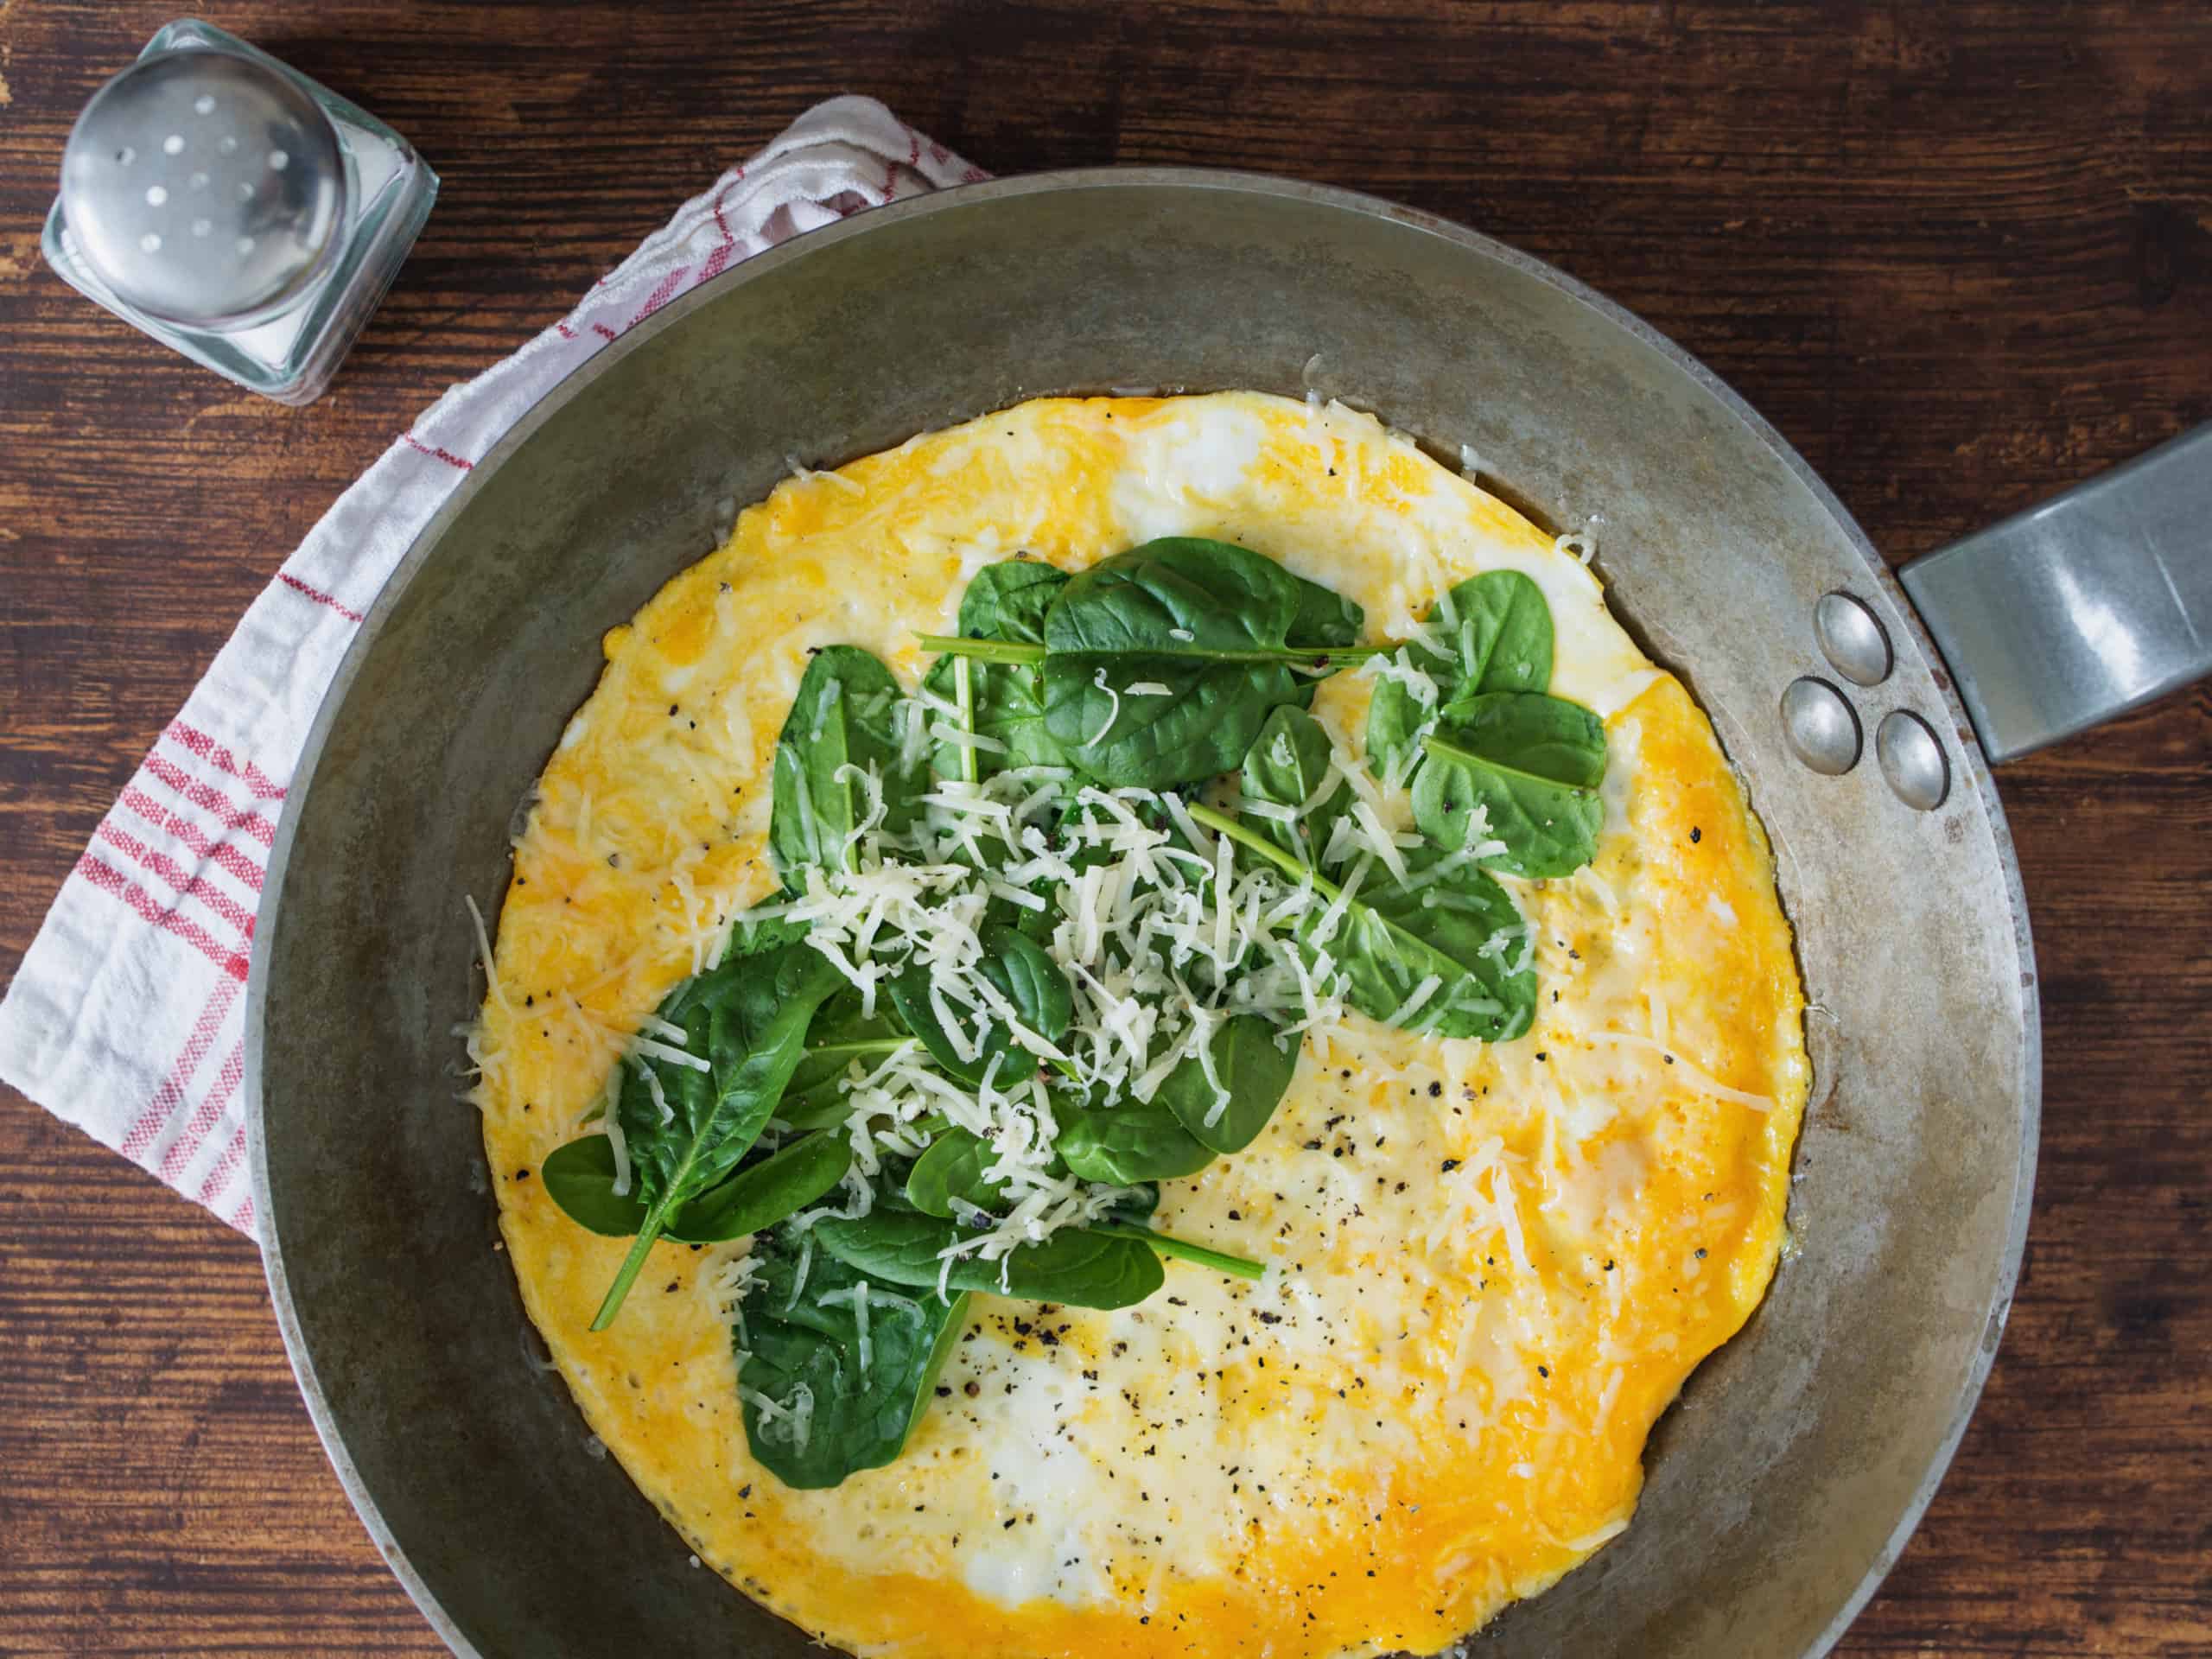 12 Low Carb Breakfast Recipes